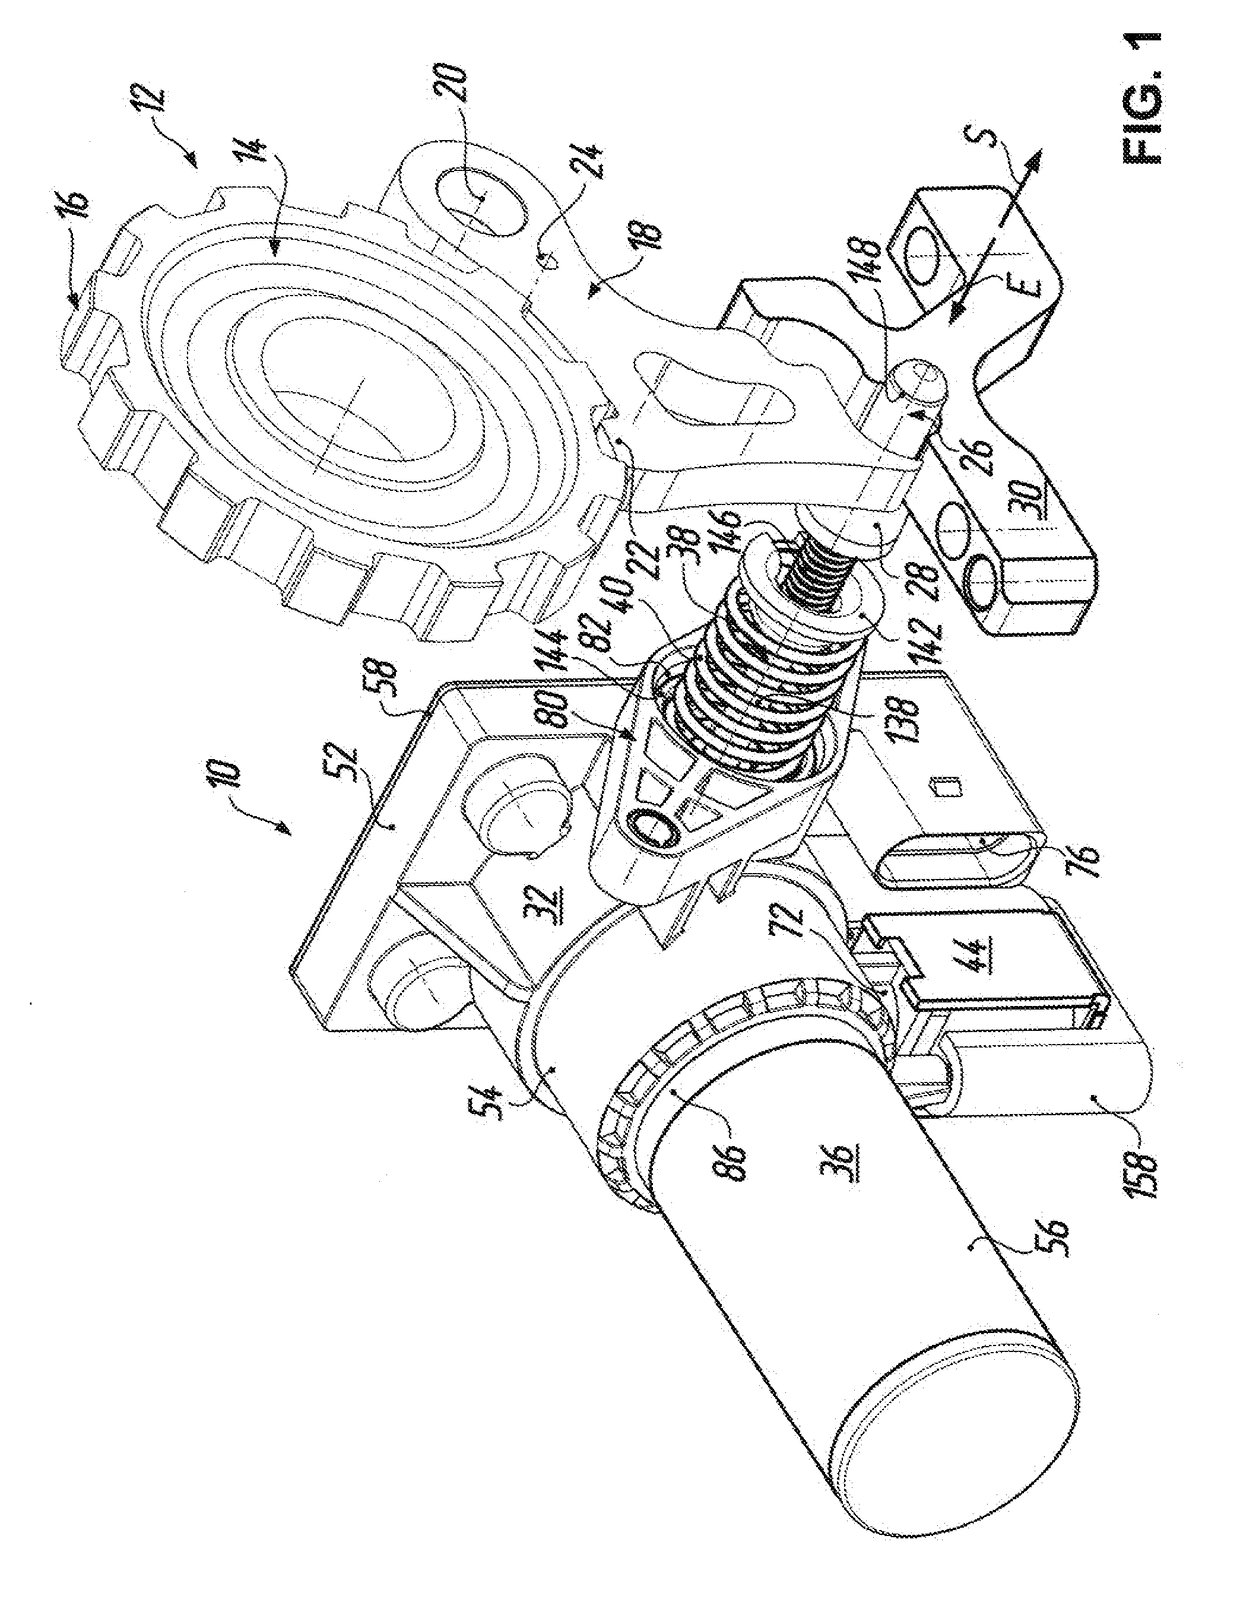 Electric parking brake actuator for actuation of a parking brake in a motor vehicle